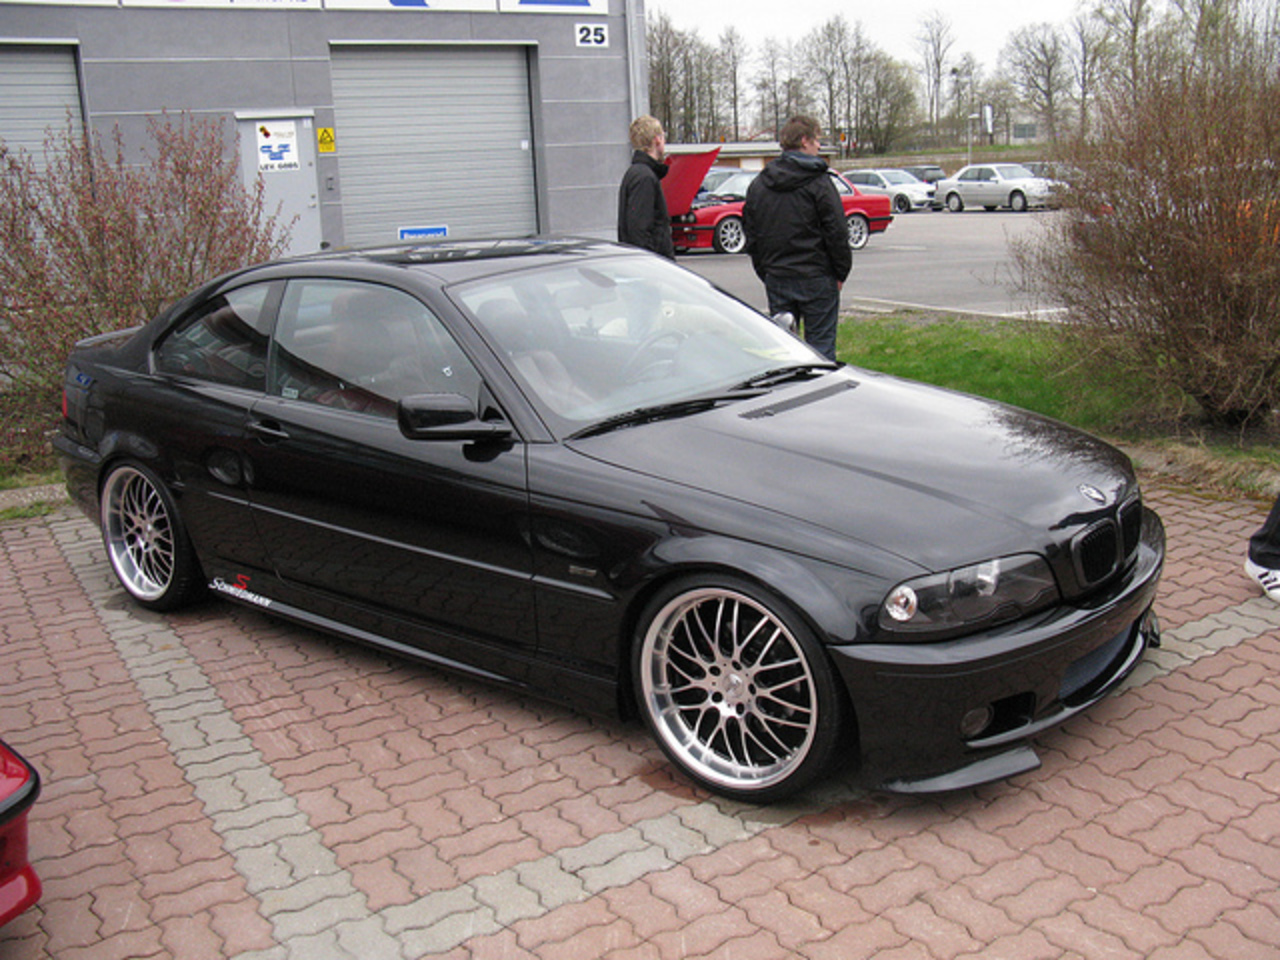 Flickr: The BMW E46 Pool